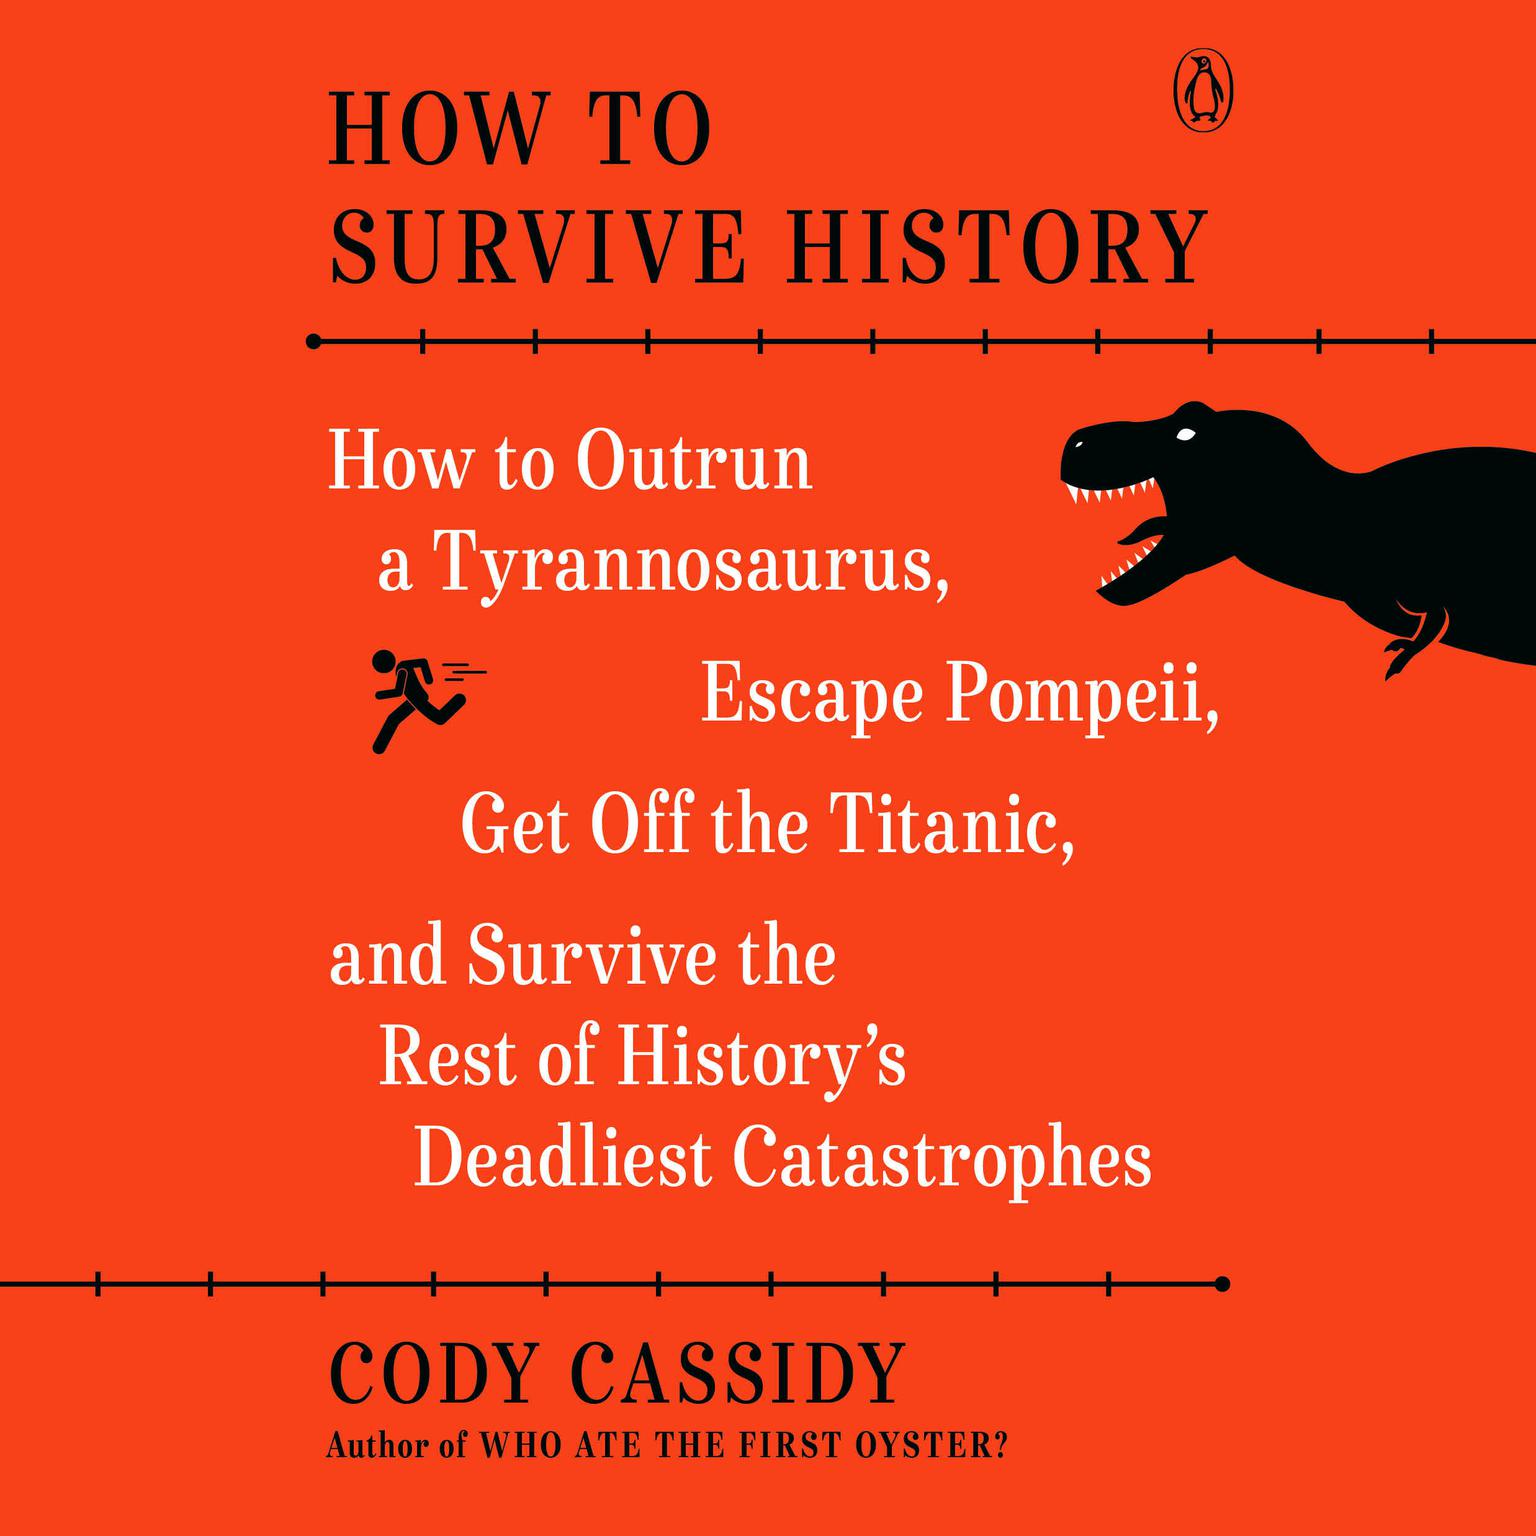 How to Survive History: How to Outrun a Tyrannosaurus, Escape Pompeii, Get Off the Titanic, and Survive the Rest of Historys Deadliest Catastrophes Audiobook, by Cody Cassidy